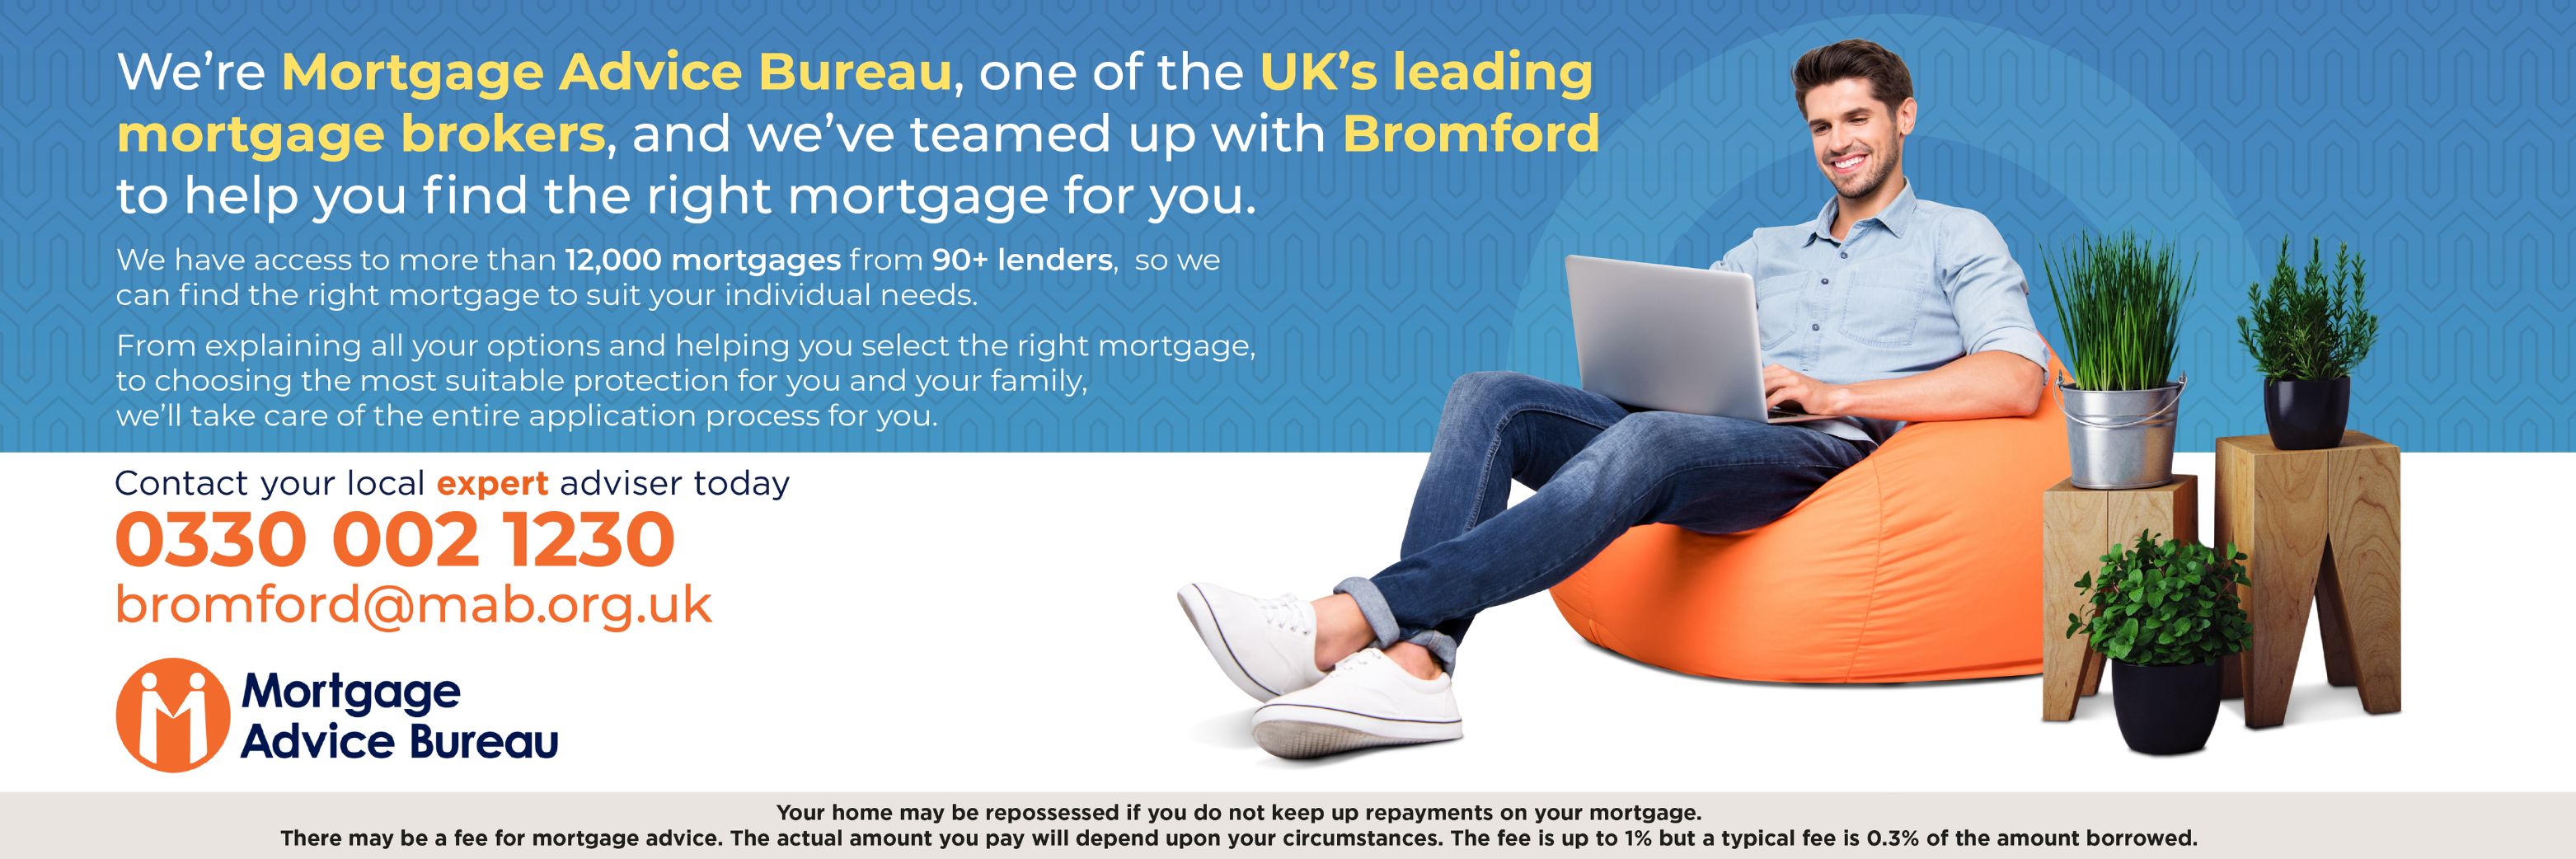 We're mortgage advice bureau, one of the UK's leading mortgage brokers.